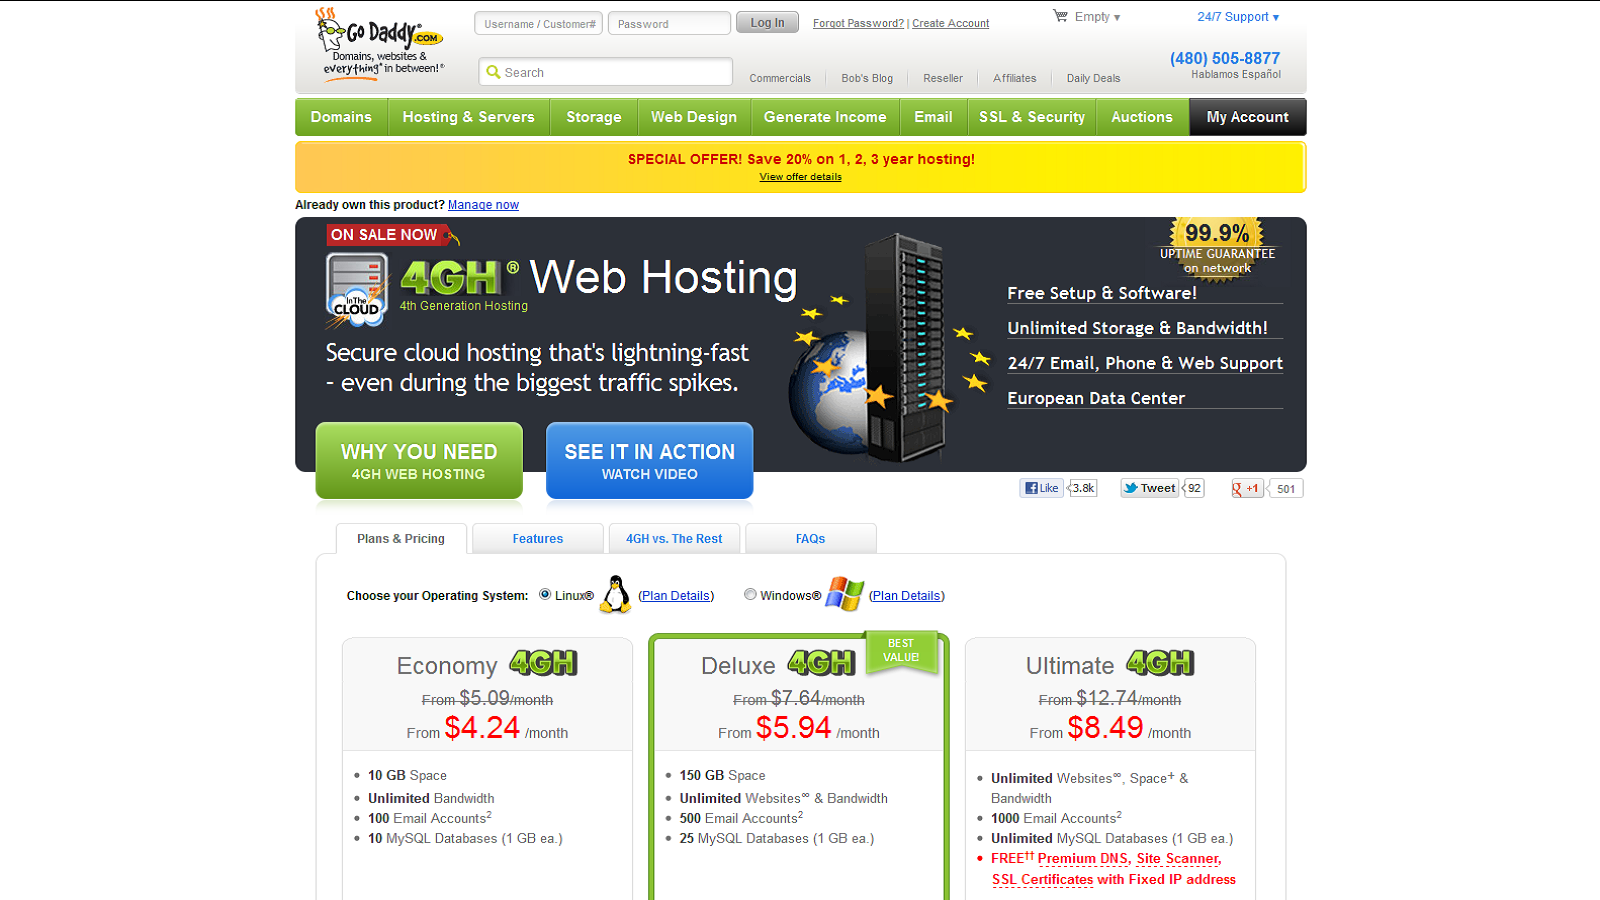 Save 20% On New 4th Generation Hosting Plans!